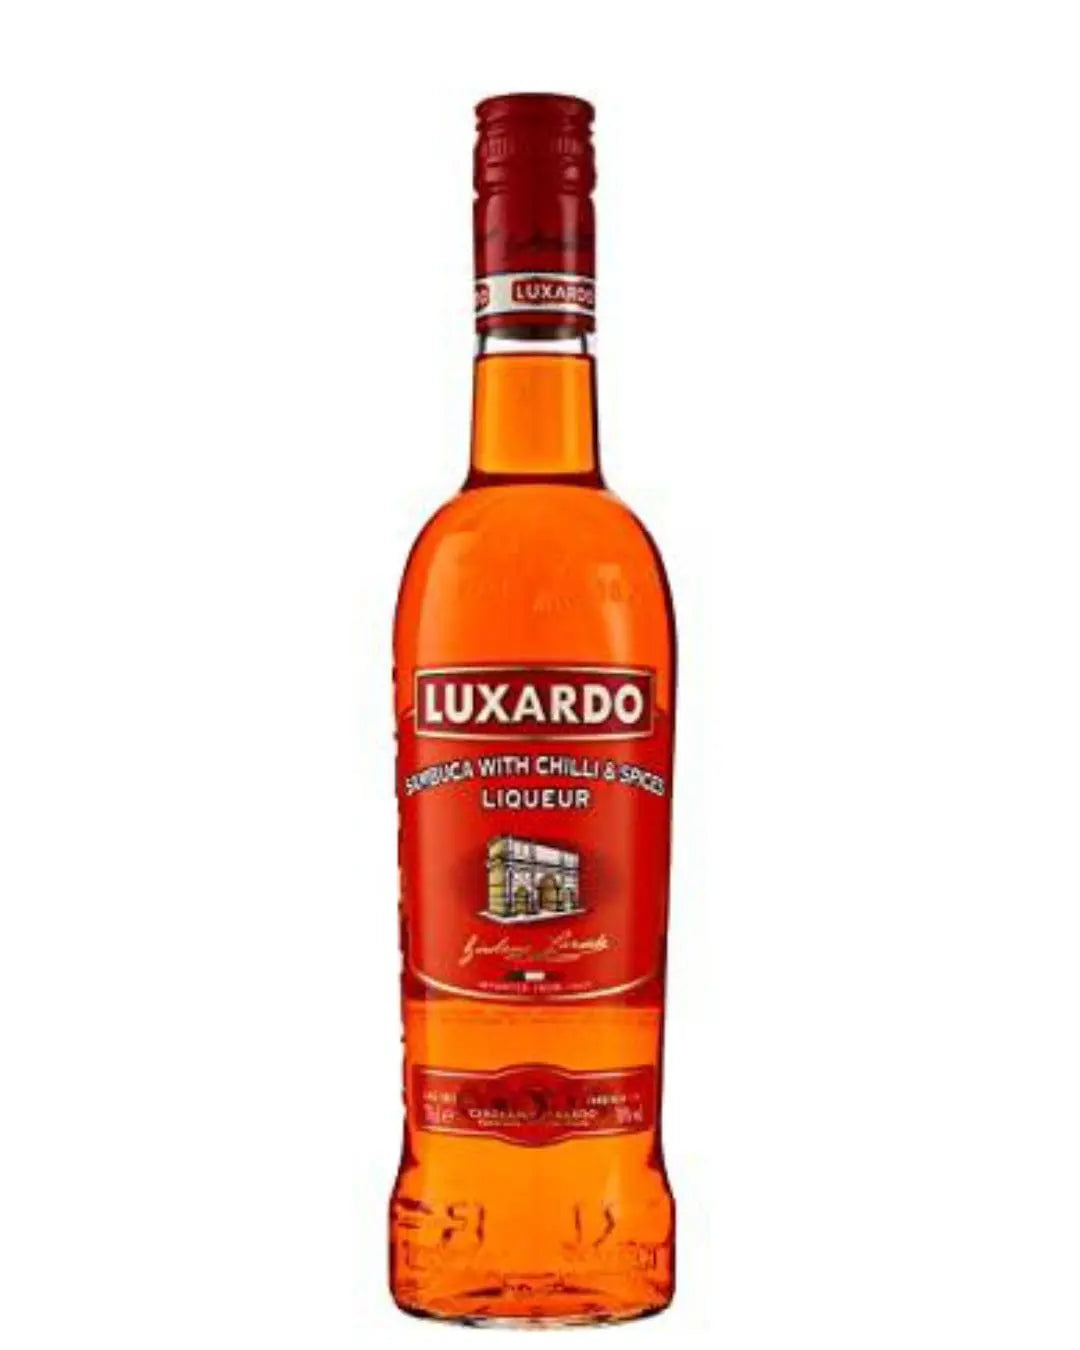 Luxardo Chilli And Spices Sambuca, 50 cl Liqueurs & Other Spirits 8000353003460